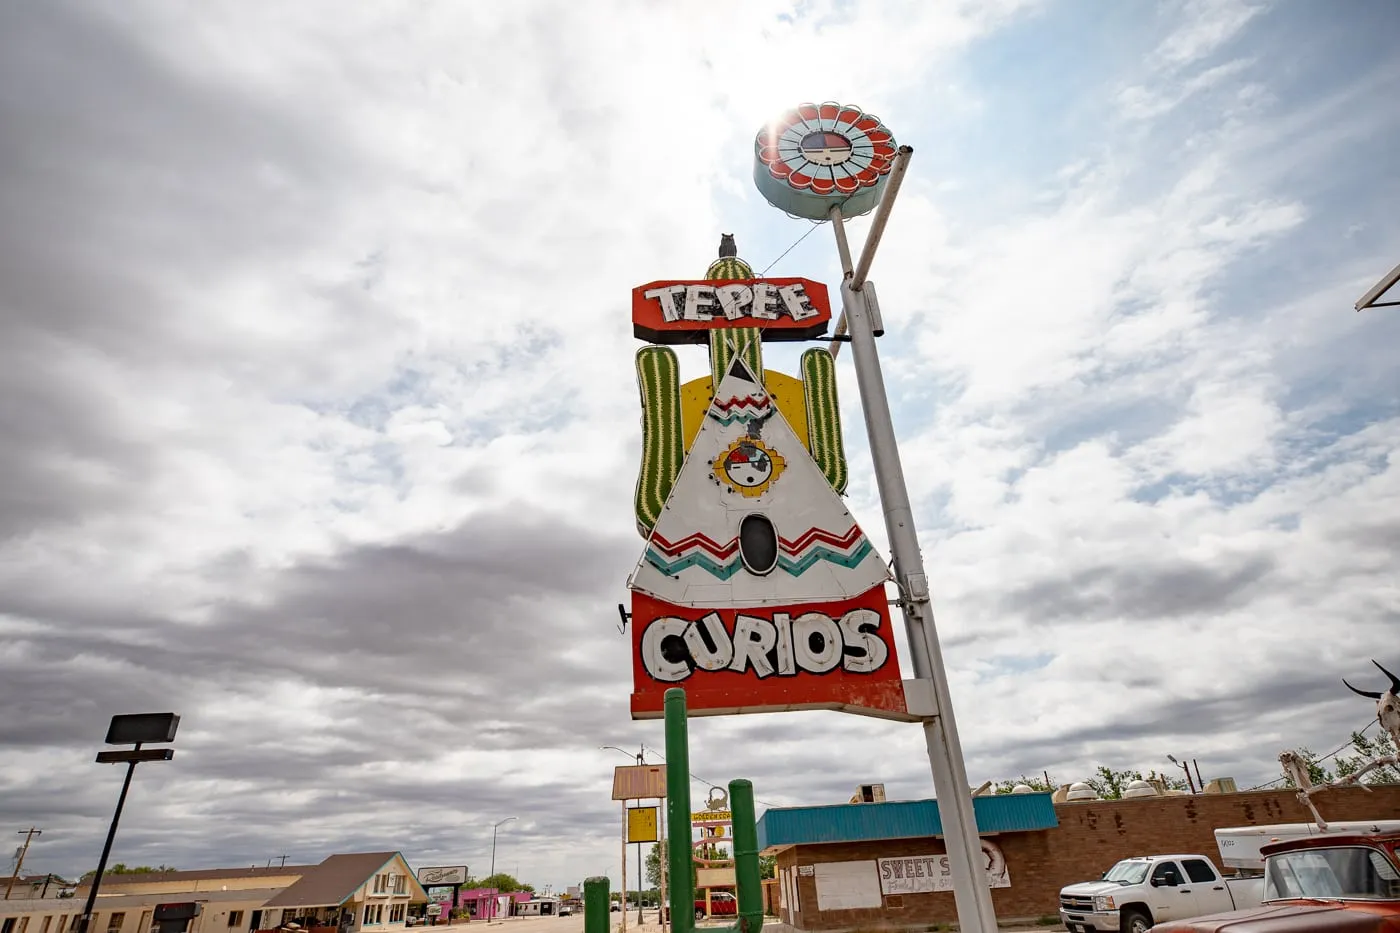 Neon Sign at Tee Pee Curios in Tucumcari, New Mexico - Route 66 Roadside Attraction